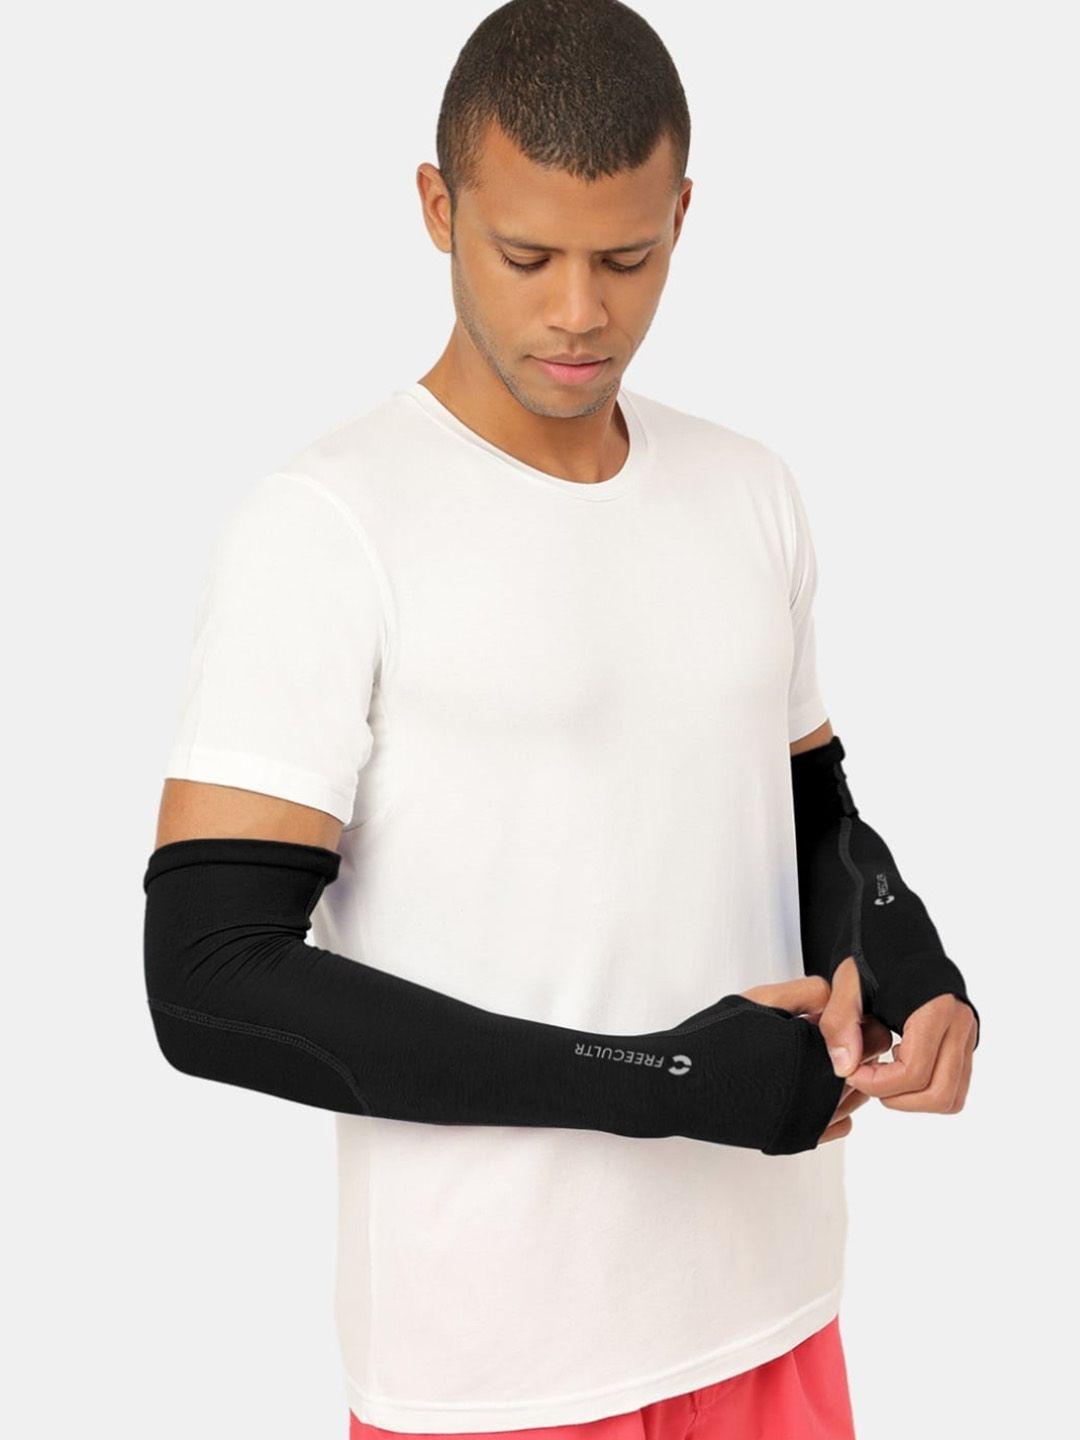 freecultr bamboo cotton breathable & anti-bacterial arm sleeves with-in built gloves